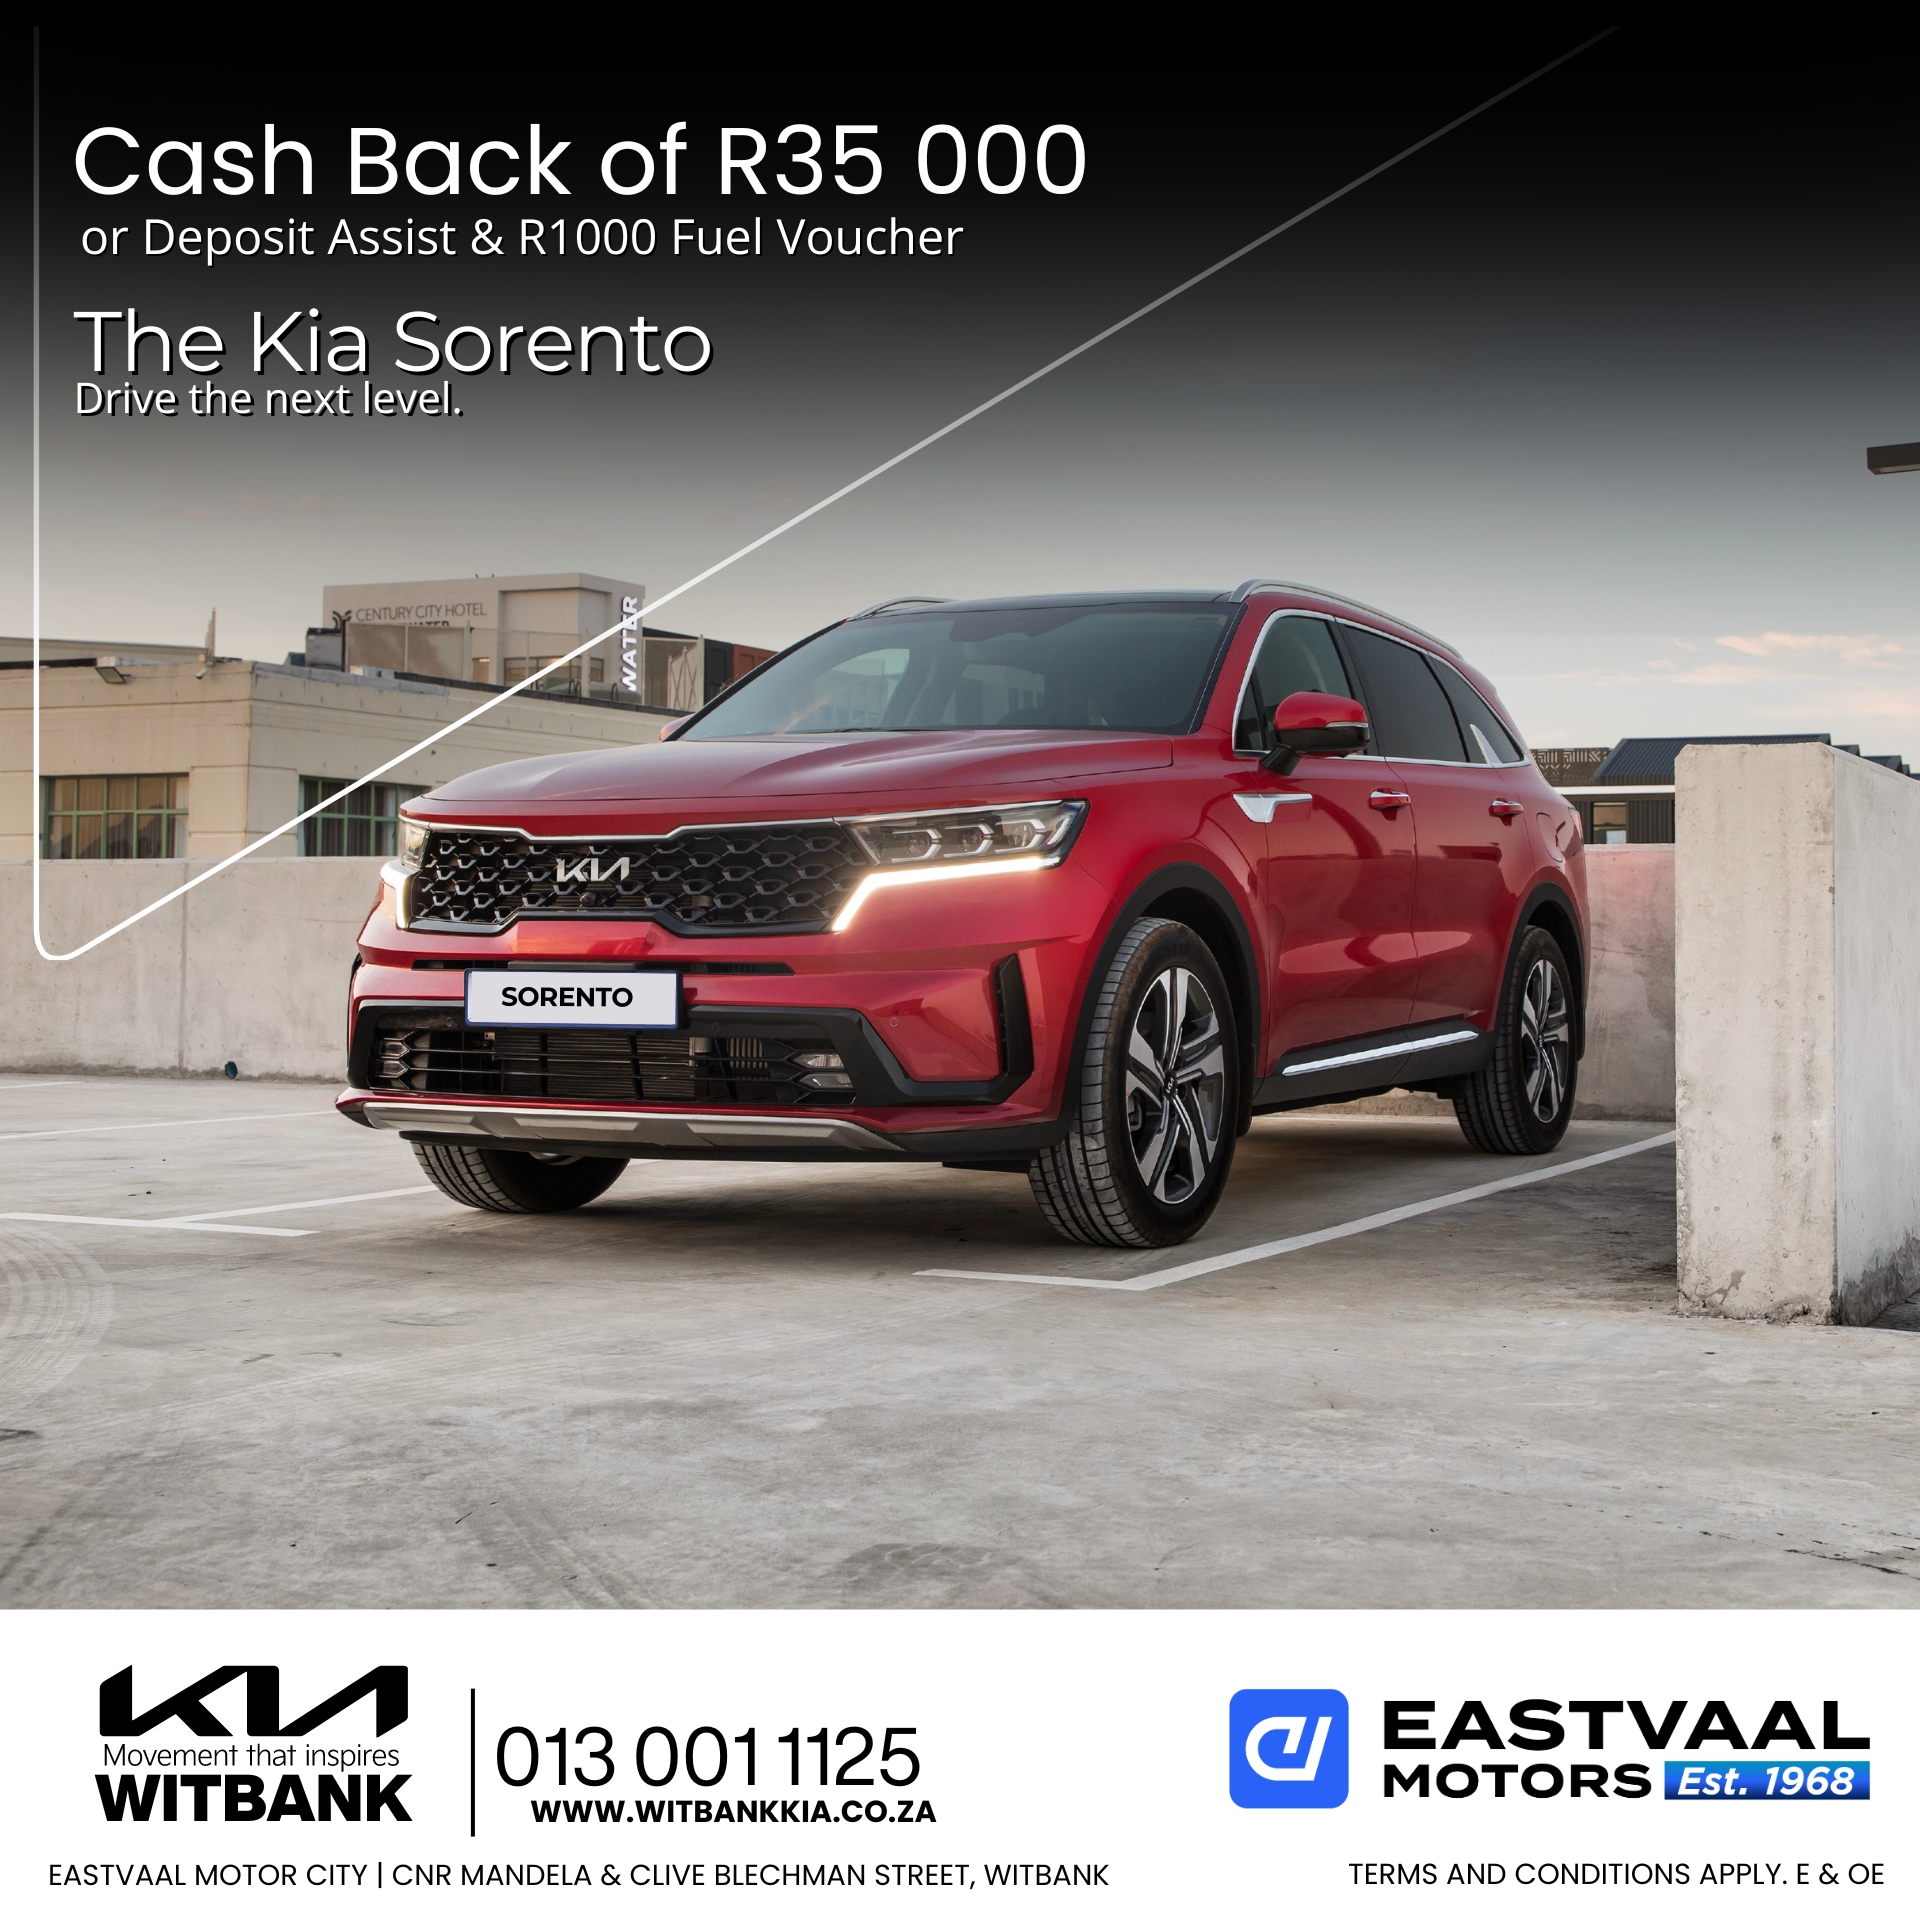 Upgrade your ride this July with amazing deals on Kia vehicles at Eastvaal Motor City.” image from 